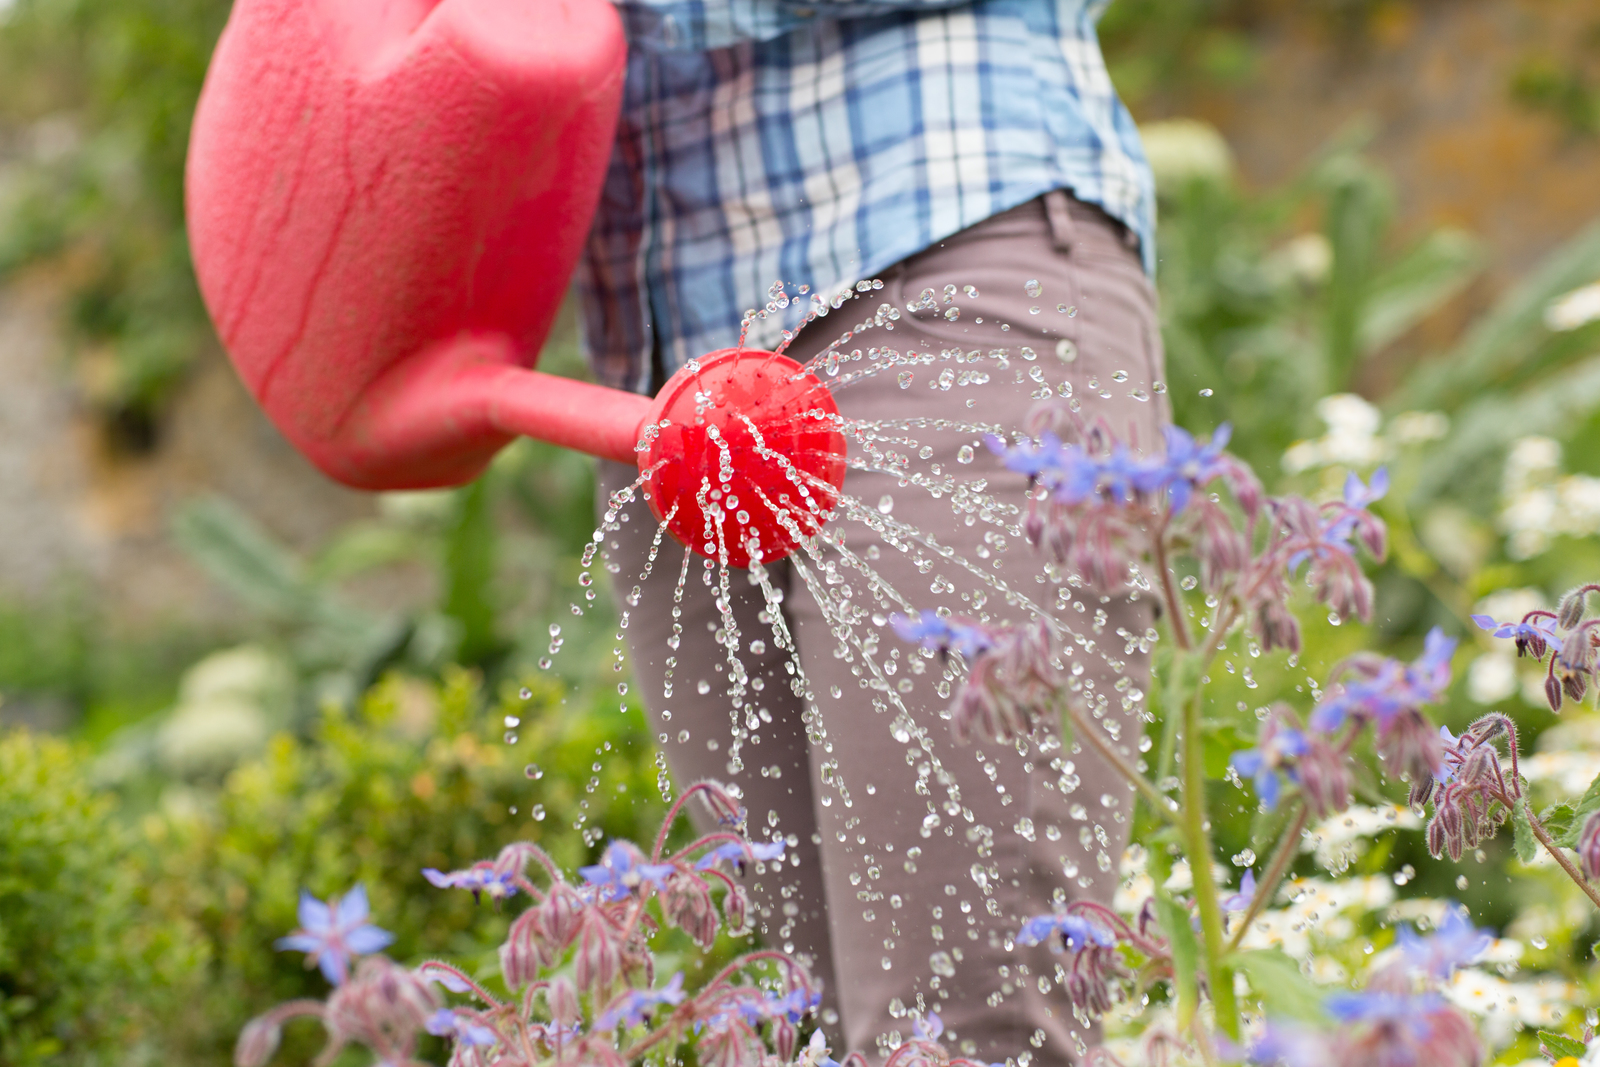 How to water your garden for free (and reduce water waste)